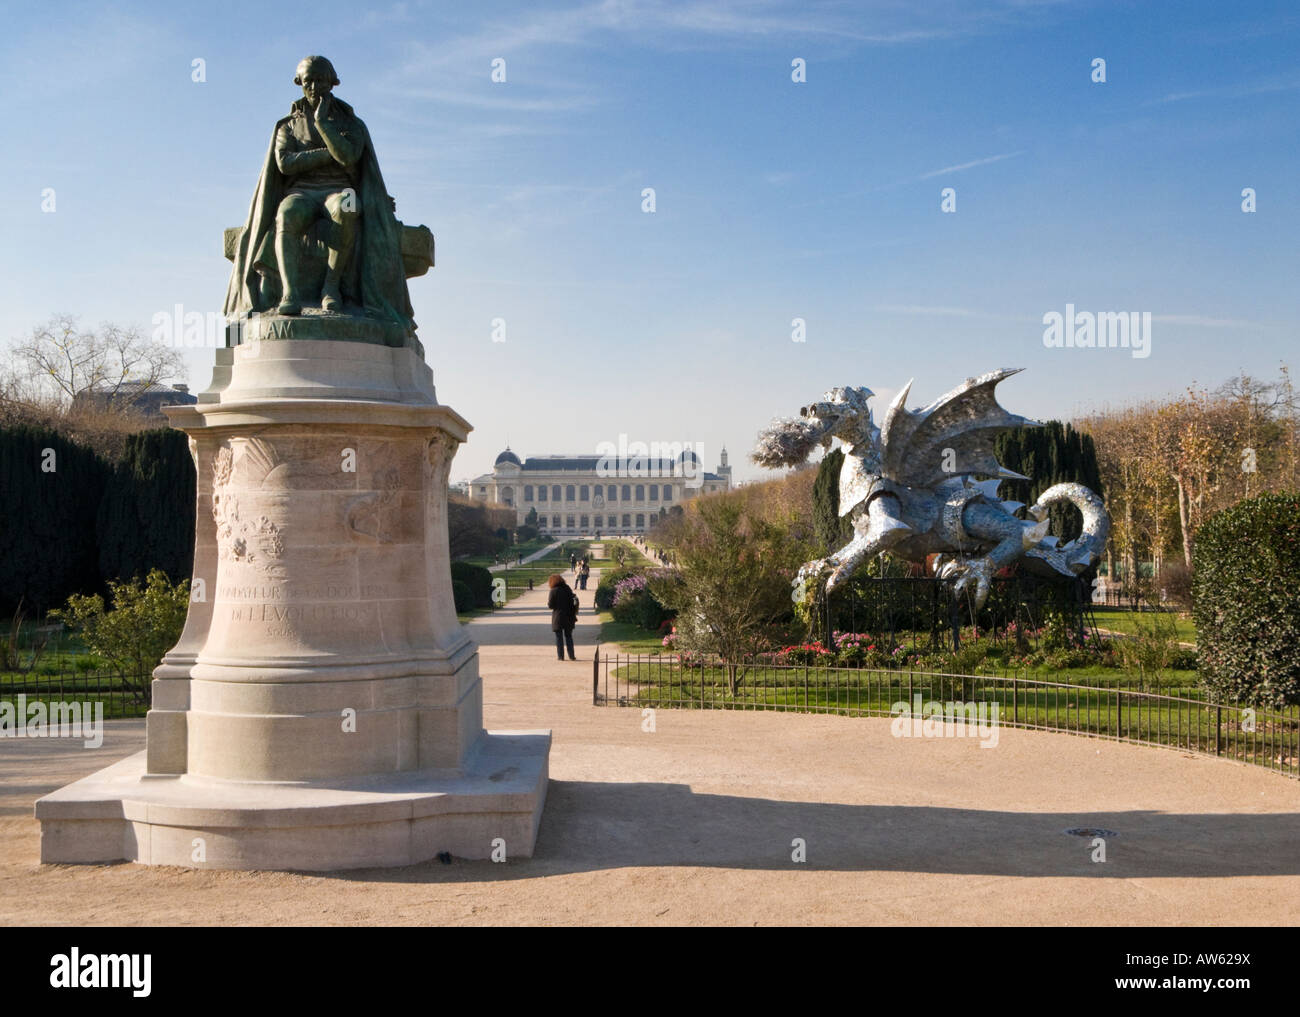 Statue of Lamarck in the Jardin des Plantes Paris France Europe with the Natural History Museum and silver dragon art sculpture Stock Photo